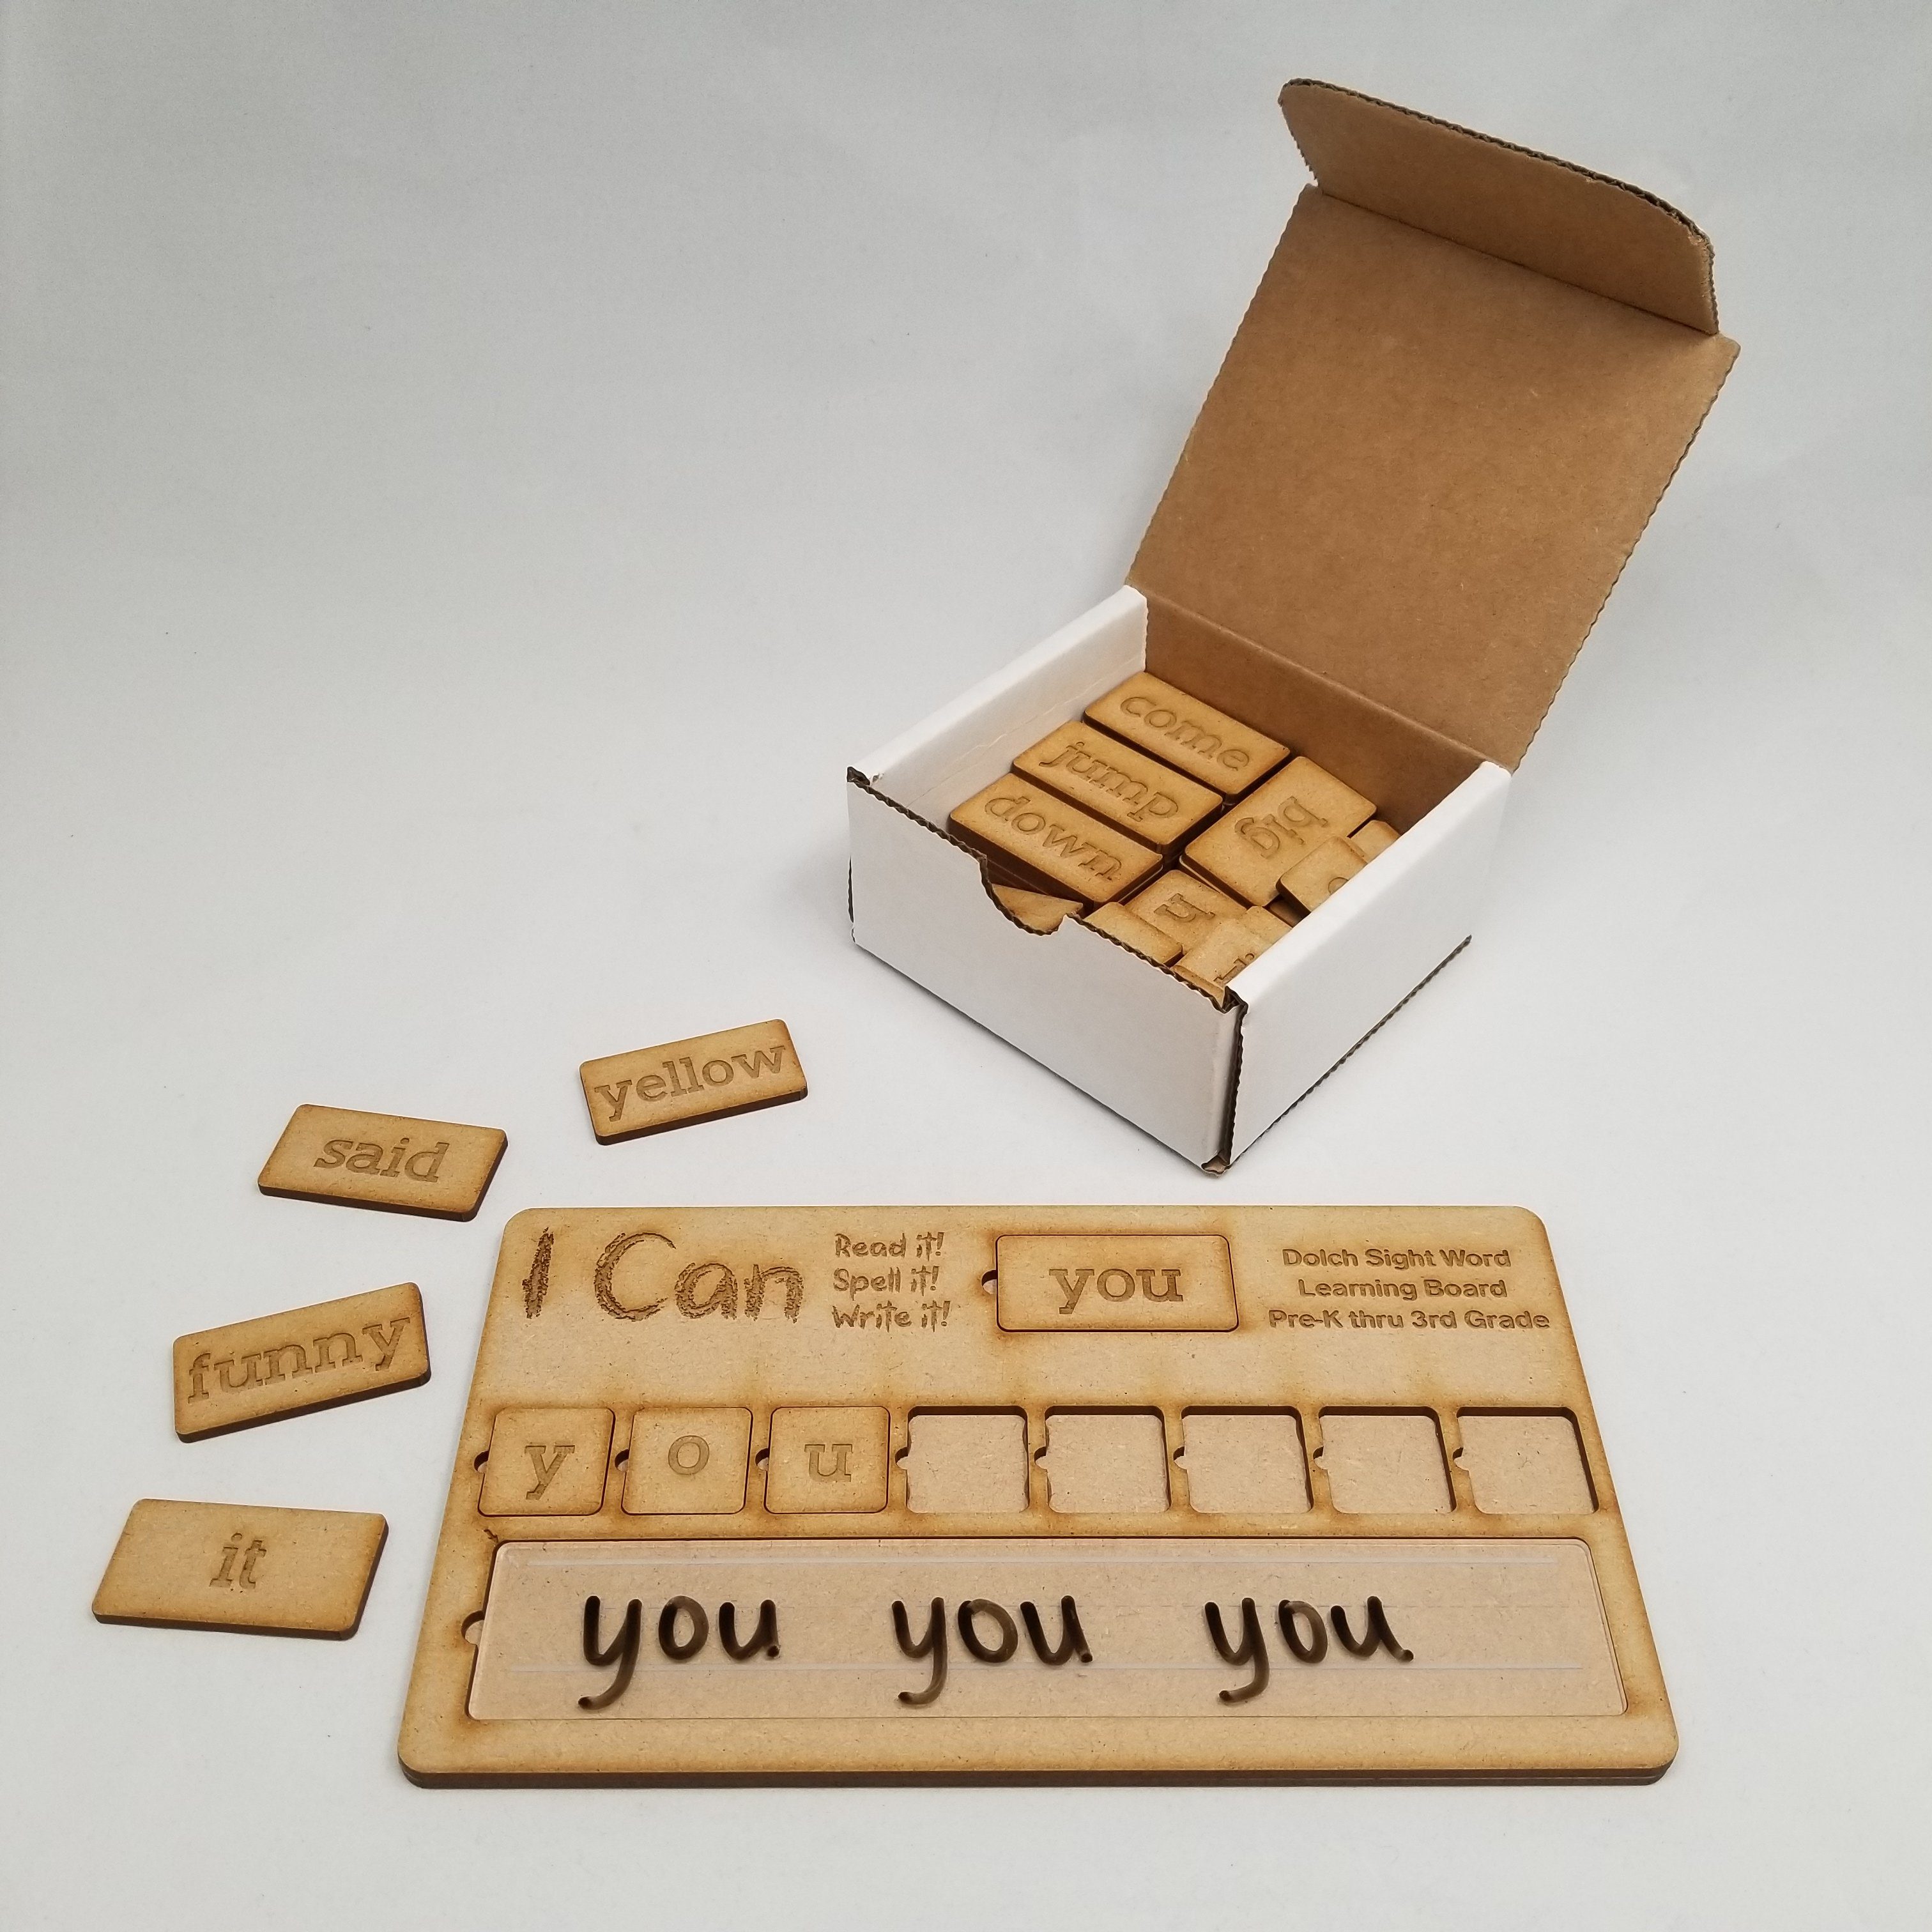 "I Can!" Dolch Sight Word Builder - Craftworks NW, LLC